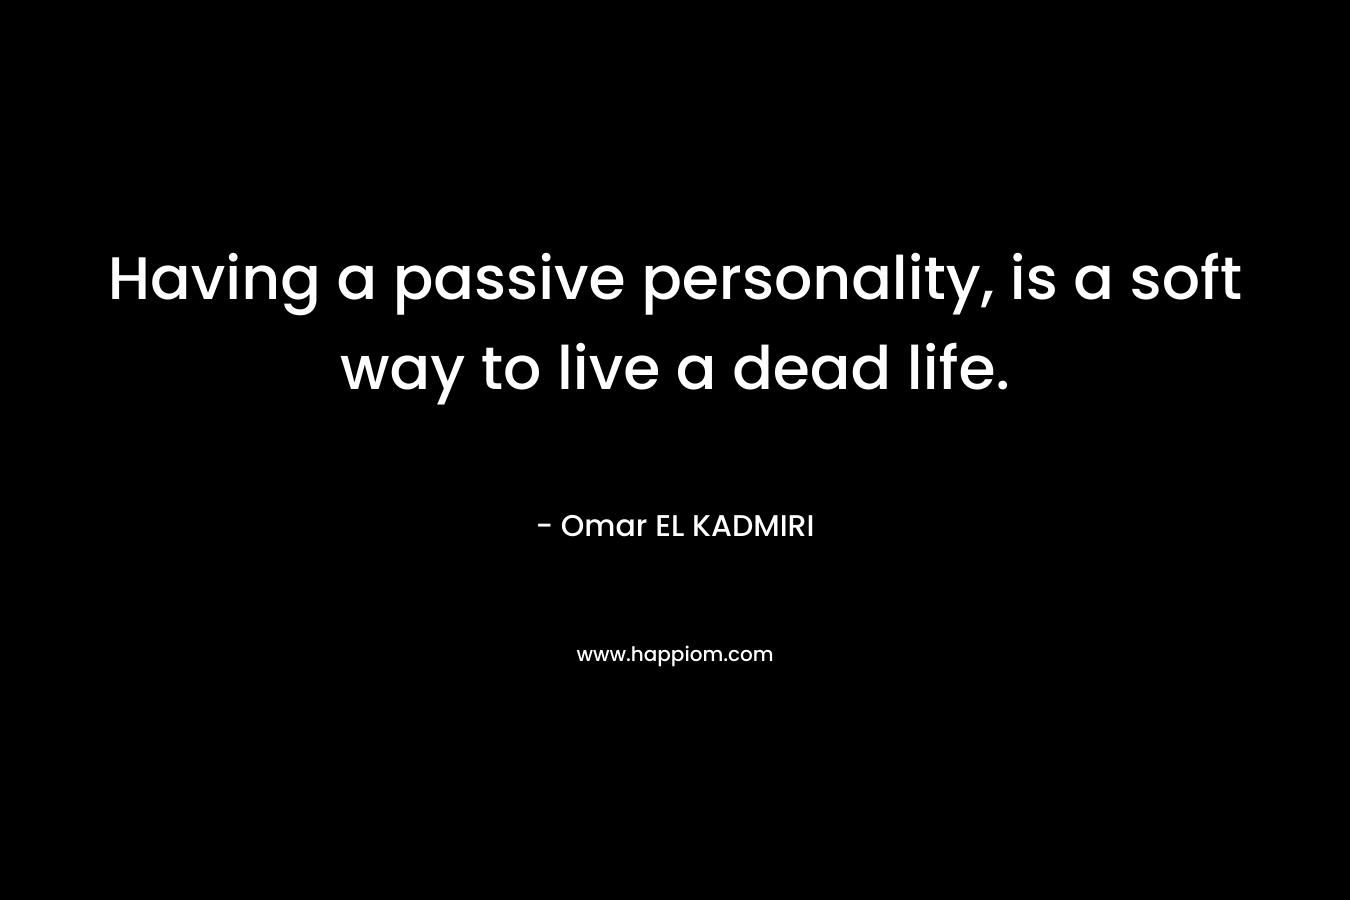 Having a passive personality, is a soft way to live a dead life.